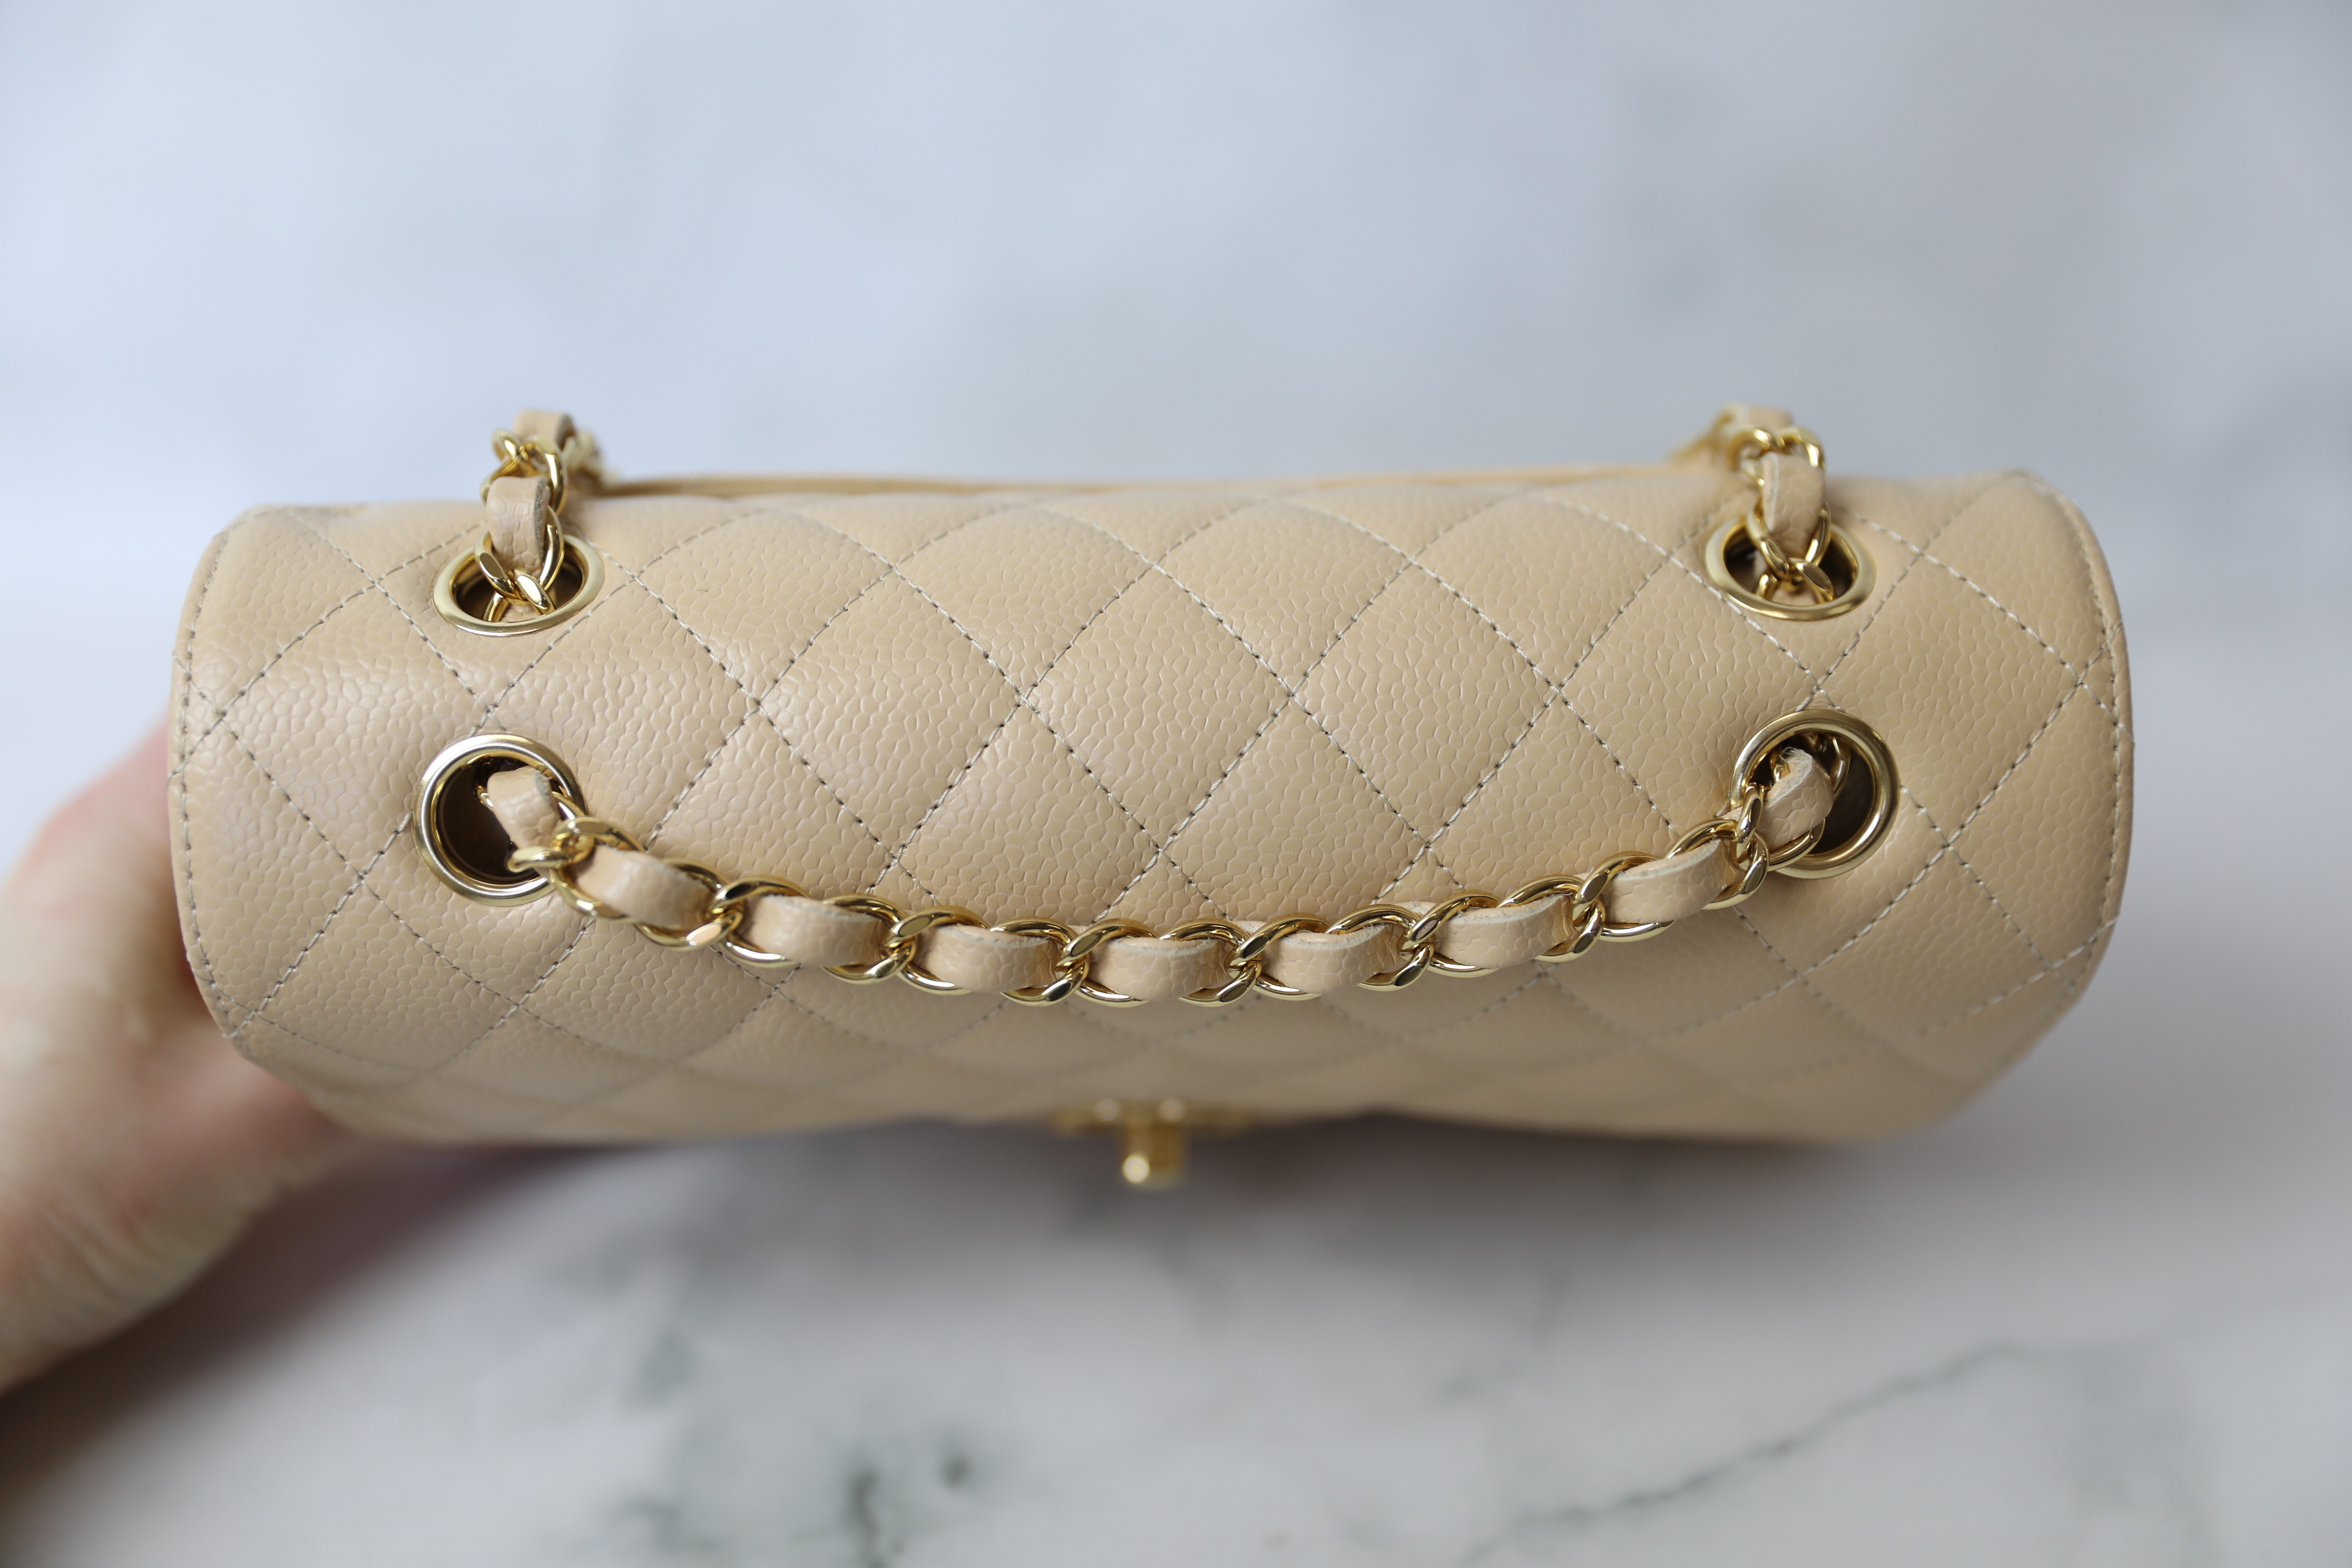 Chanel Classic Small, Beige Clair Caviar with Gold Hardware, New